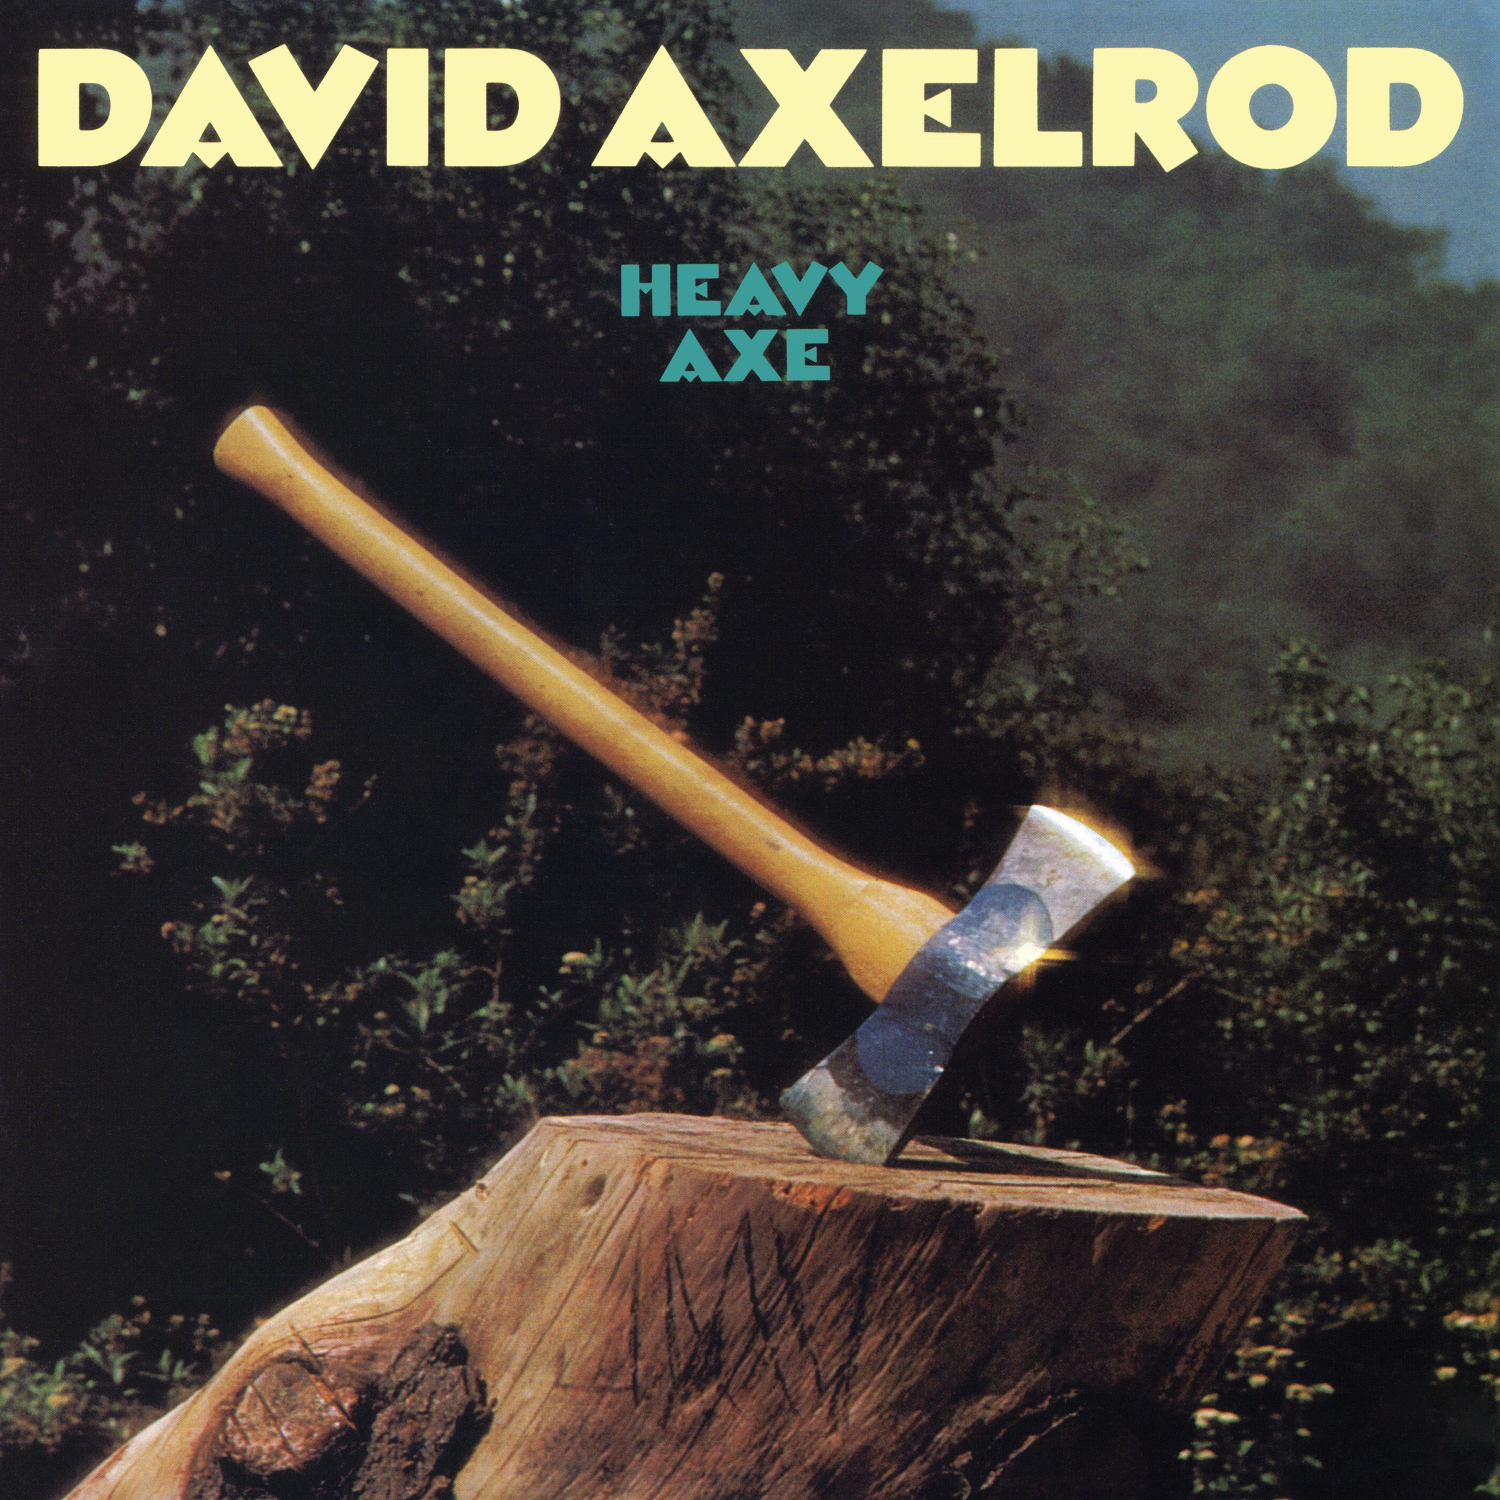 Featured Image for “TWO NEW TOP SHELF REISSUES FROM DAVID AXELROD & BERNARD PURDIE”